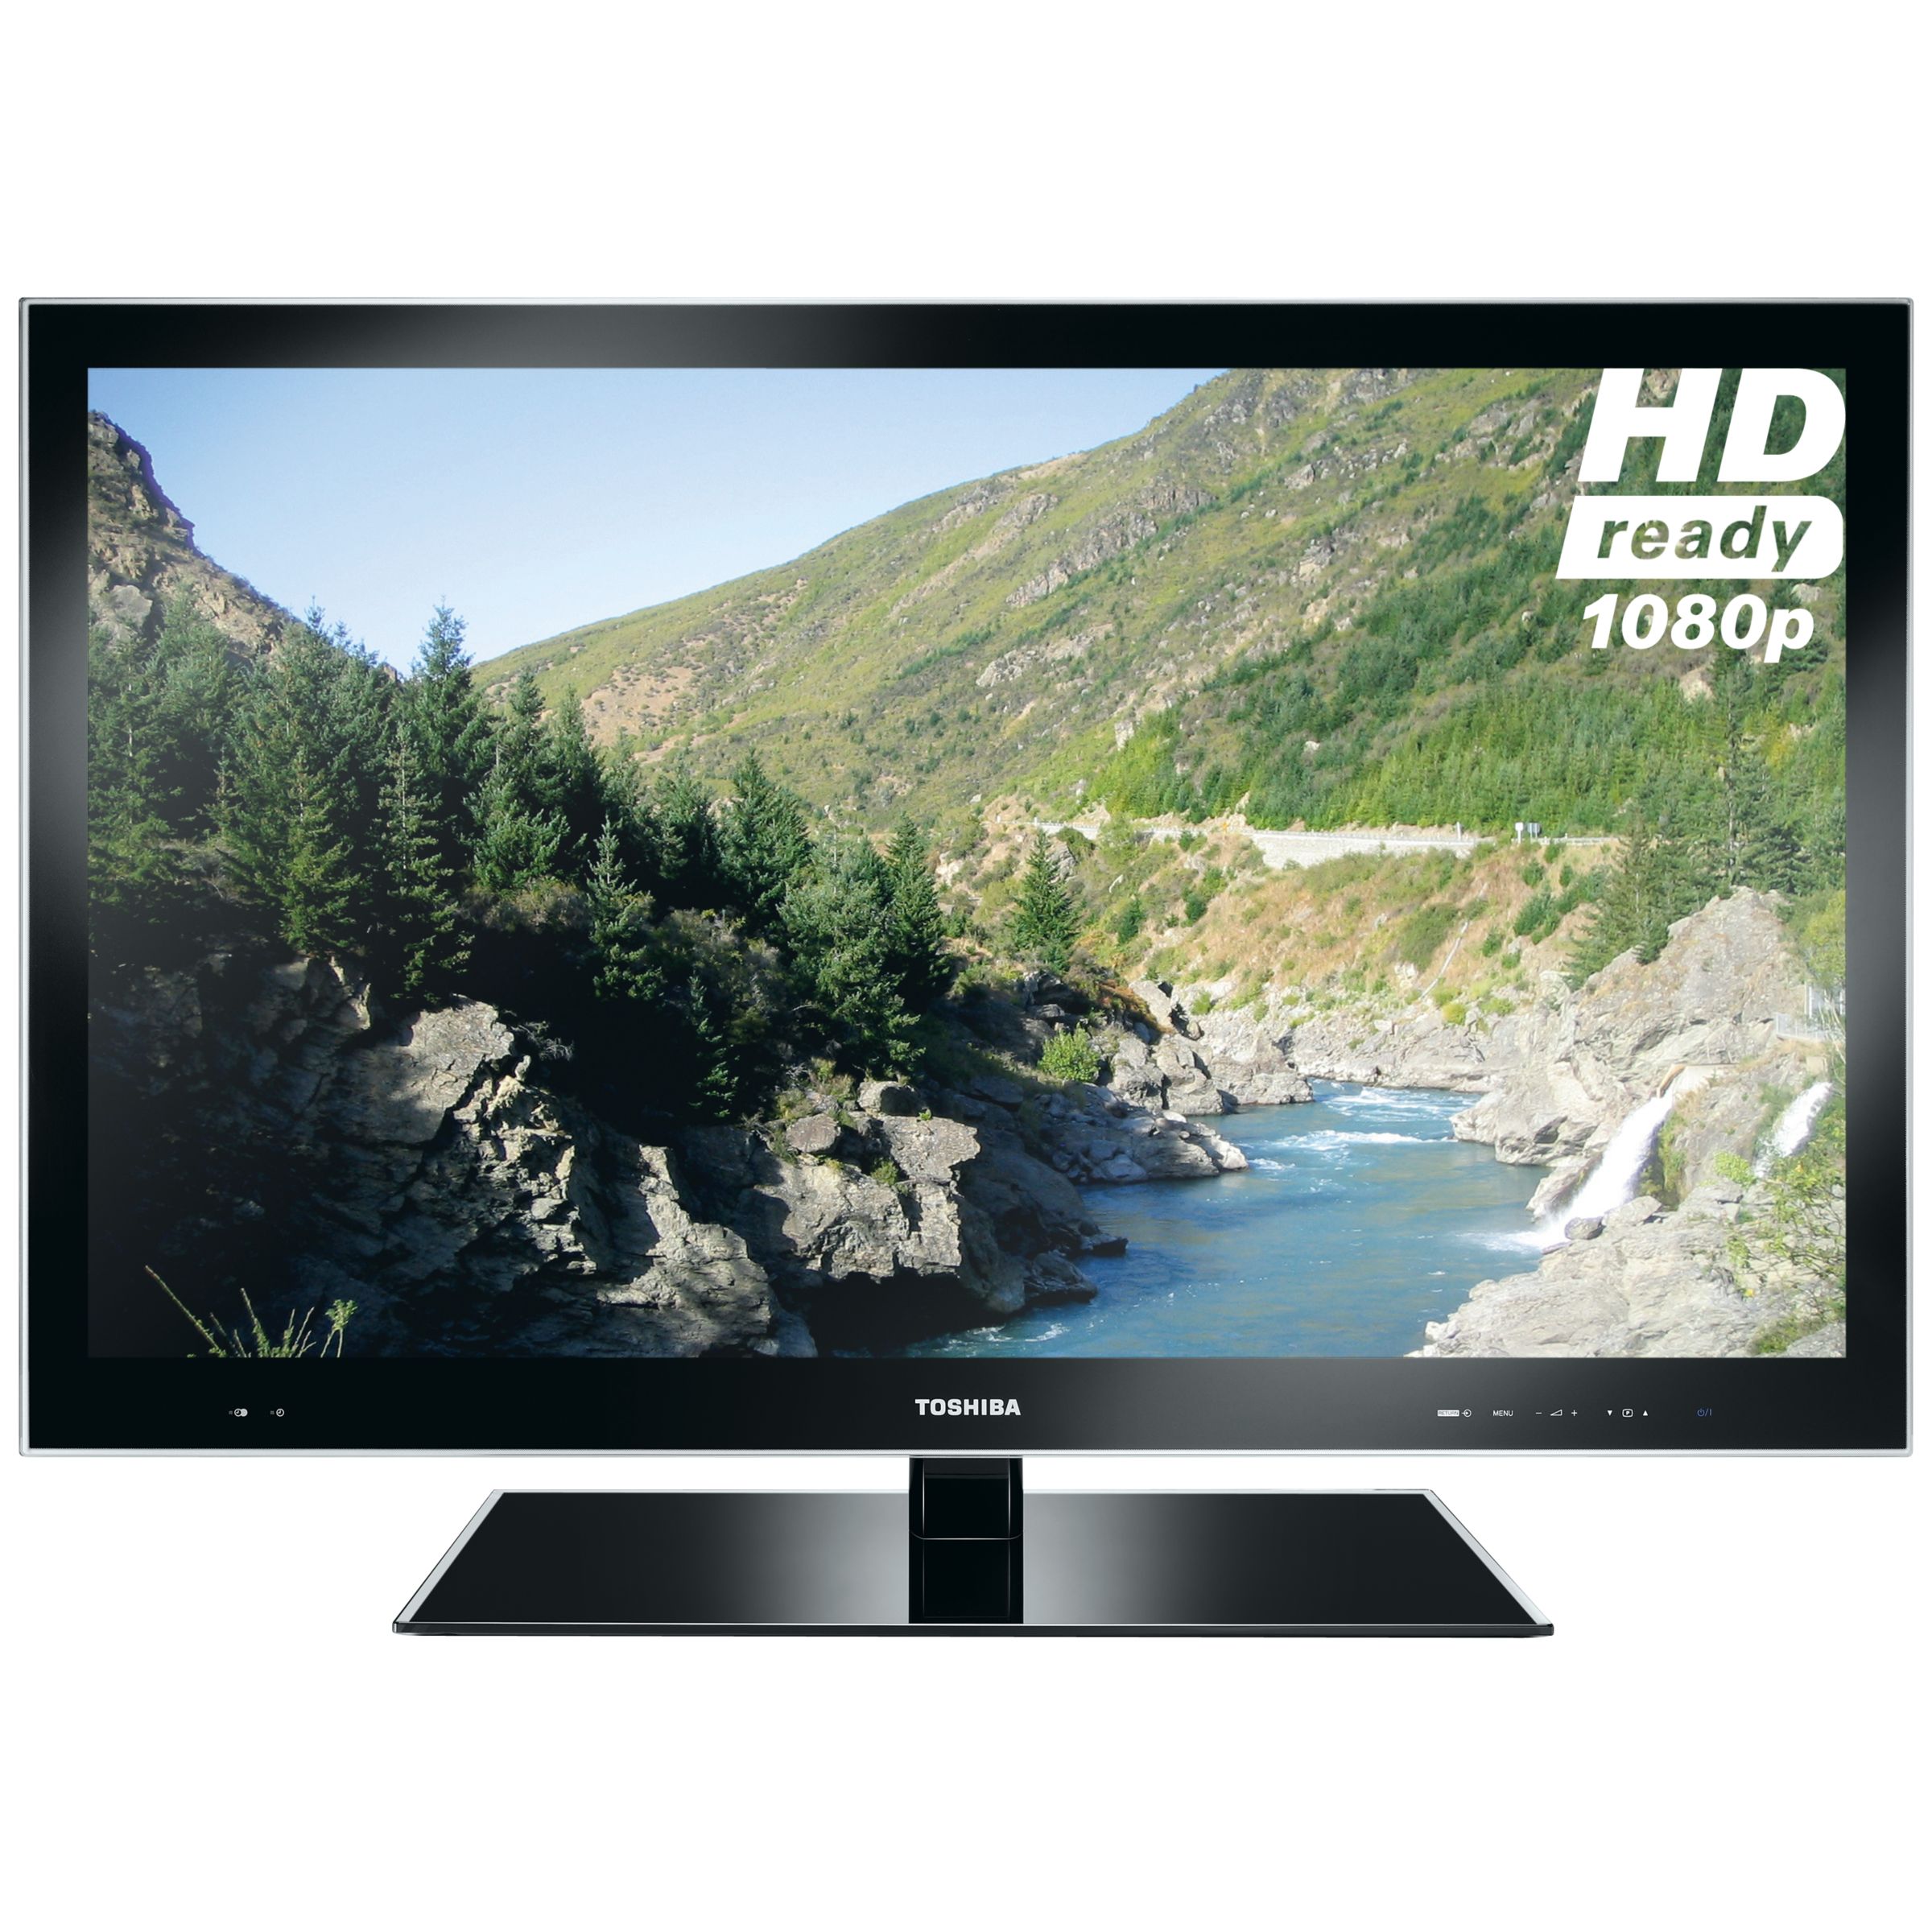 Toshiba Regza 46VL758 LED HD 1080p Television, 46 Inch with Built-in Freeview HD at John Lewis